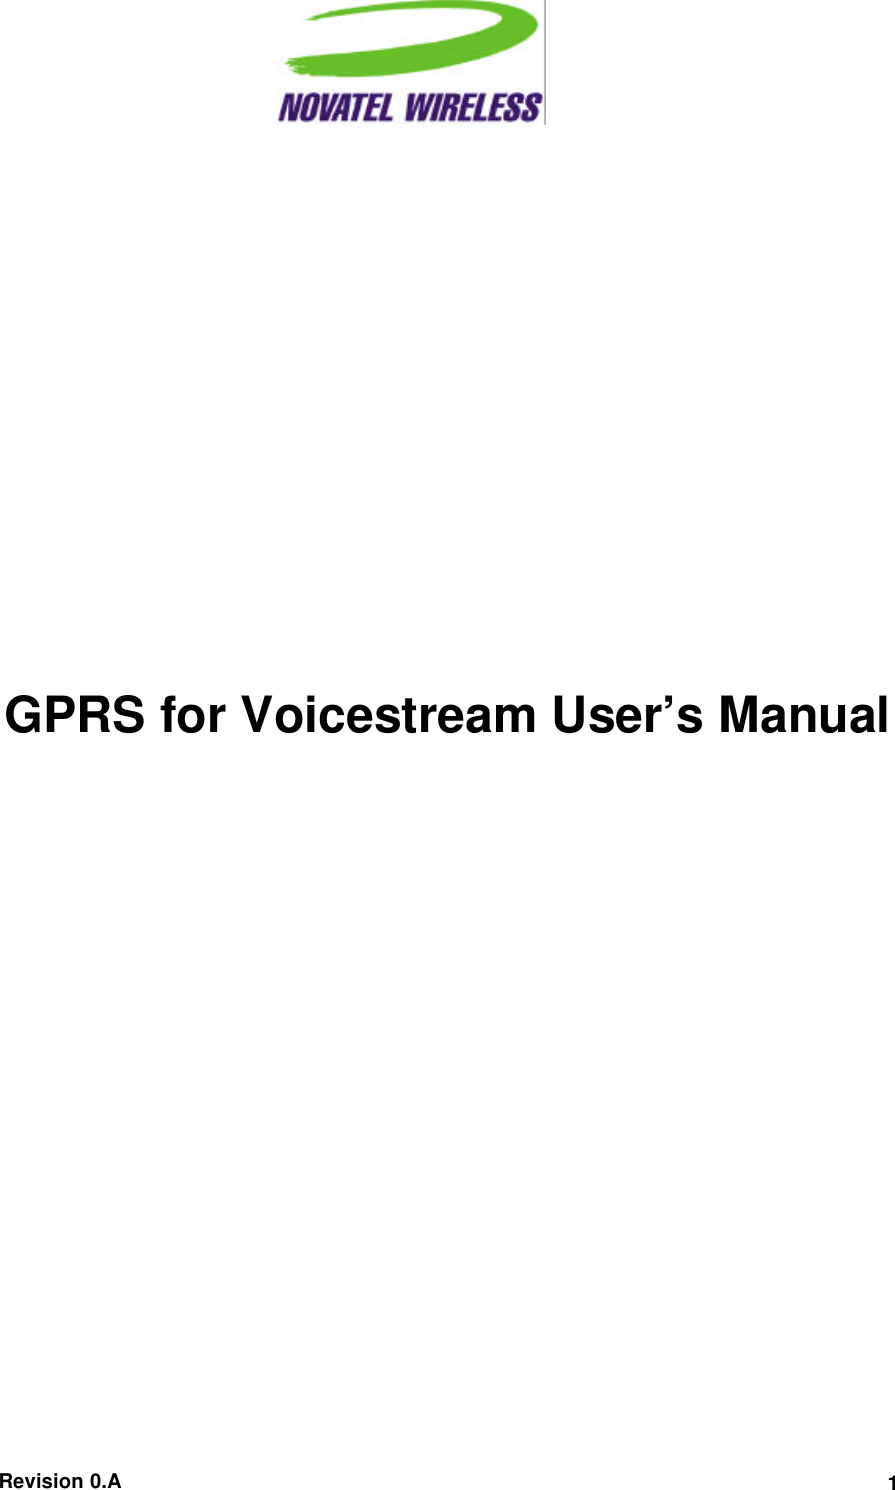  Revision 0.A 1     GPRS for Voicestream User’s Manual 